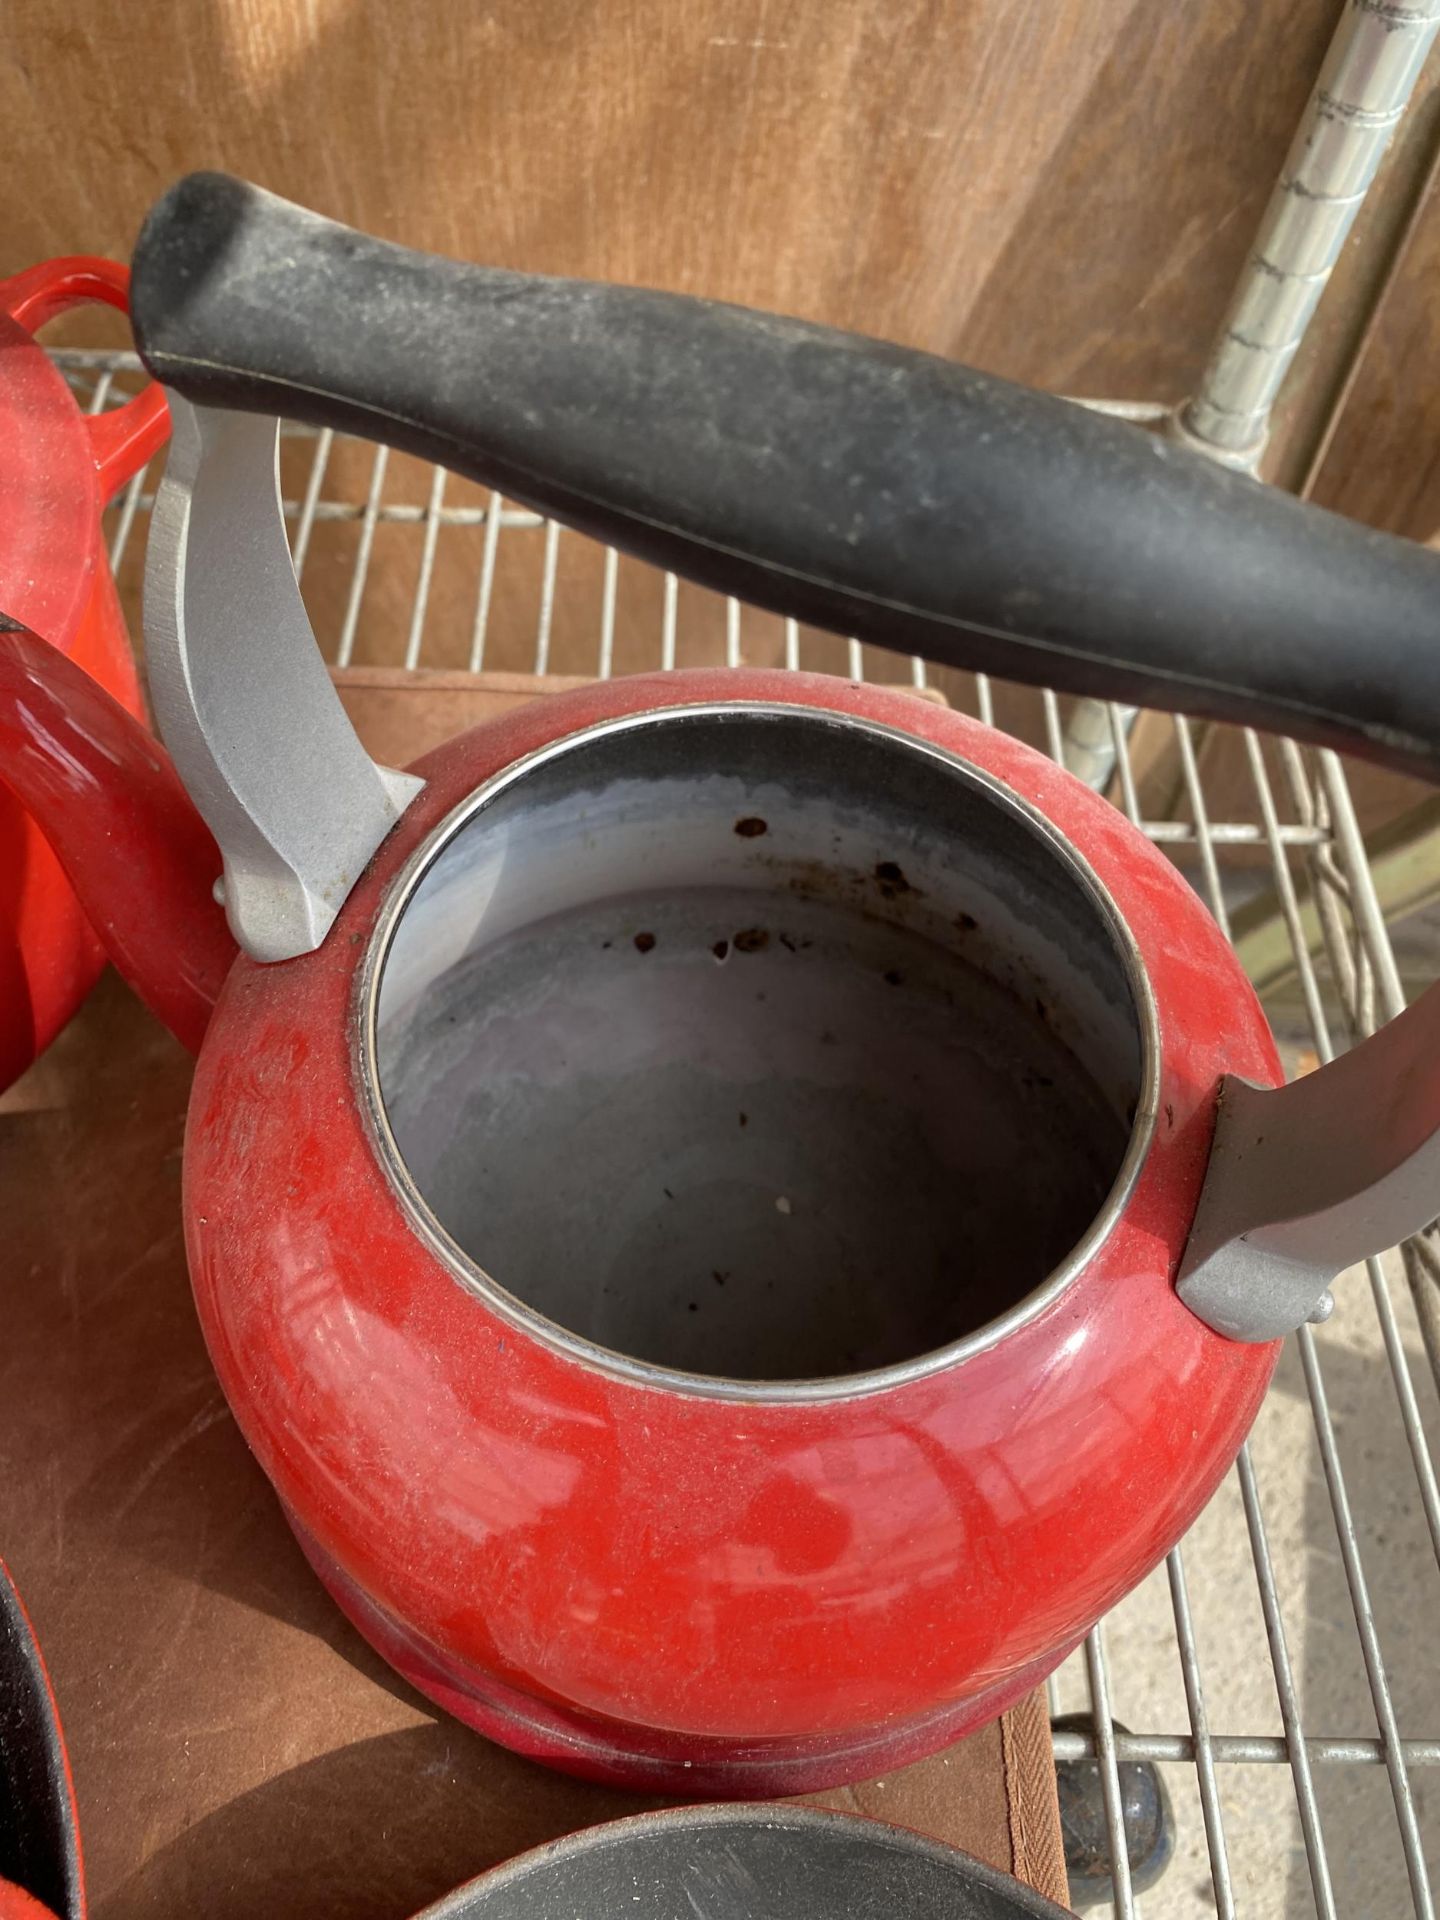 A RED LE CREUSET PAN SET WITH THREE CASAROLE DISHES, FOUR FRYING PANS AND A KETTLE - Image 5 of 5